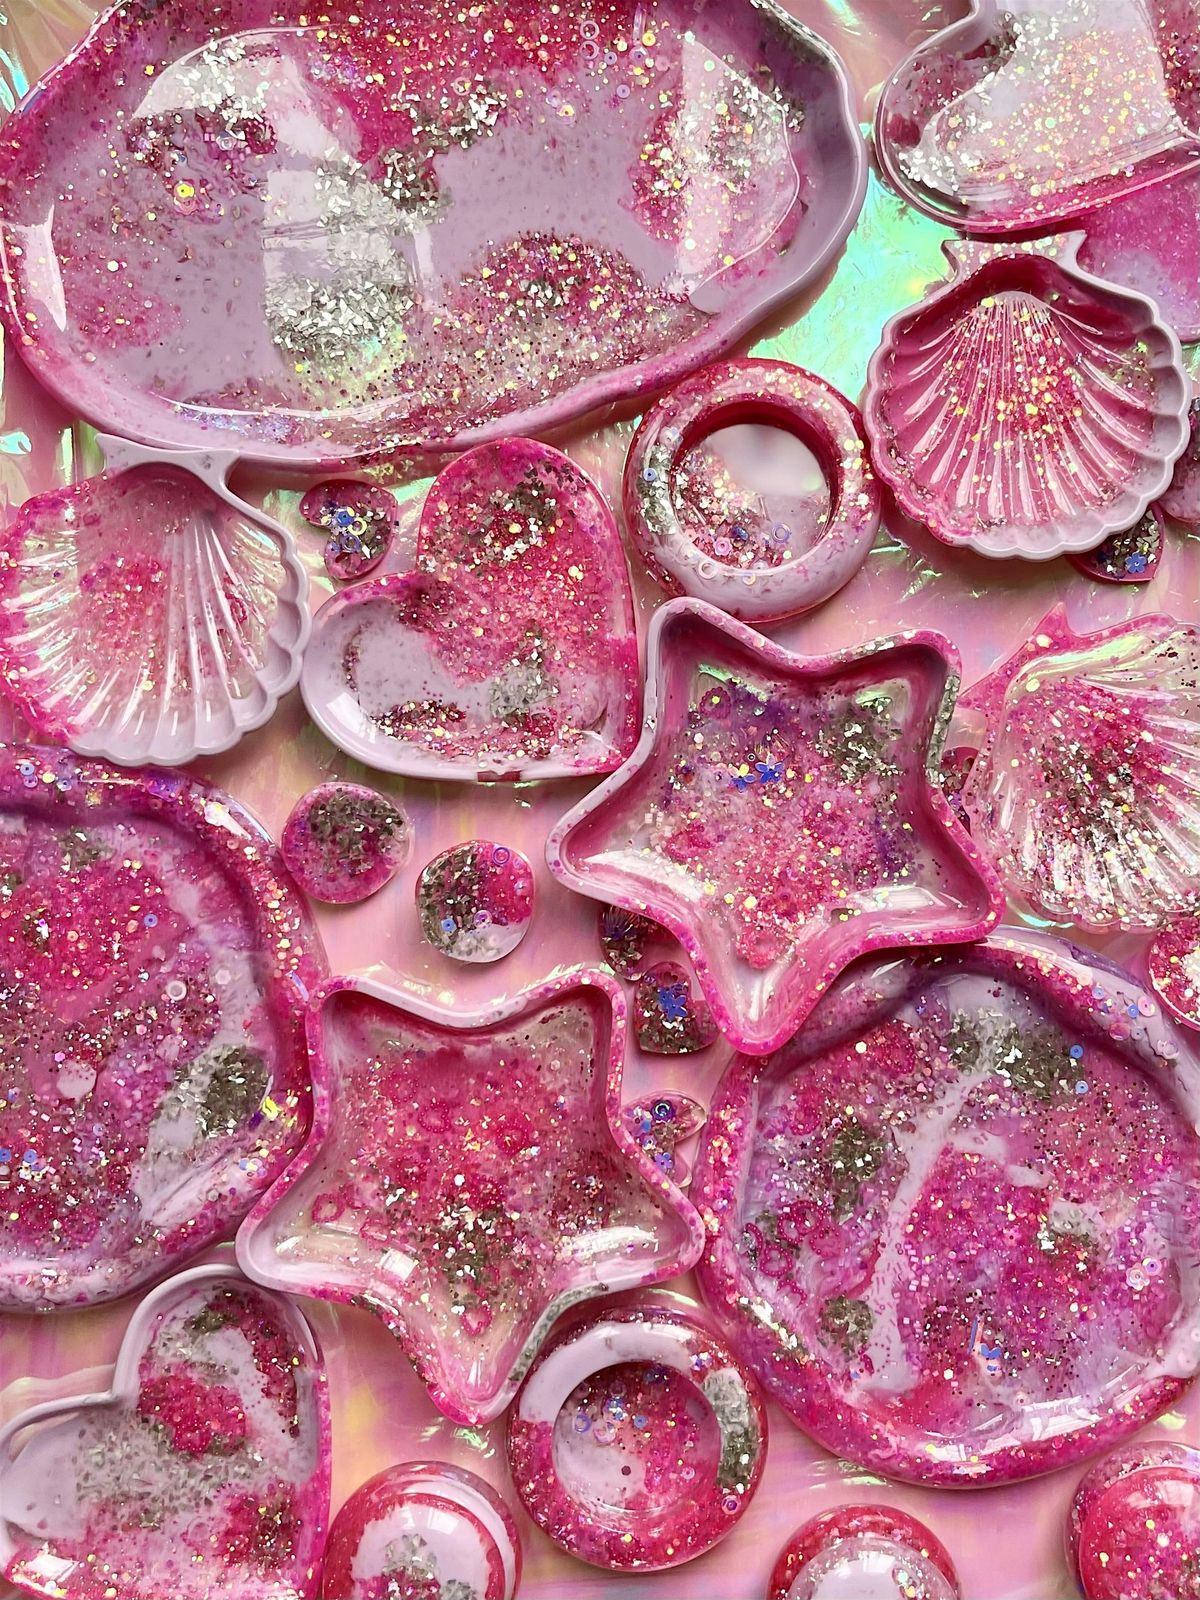 RESIN CASTING WORKSHOP - MAKE YOUR OWN SHELL JEWELLERY DISH